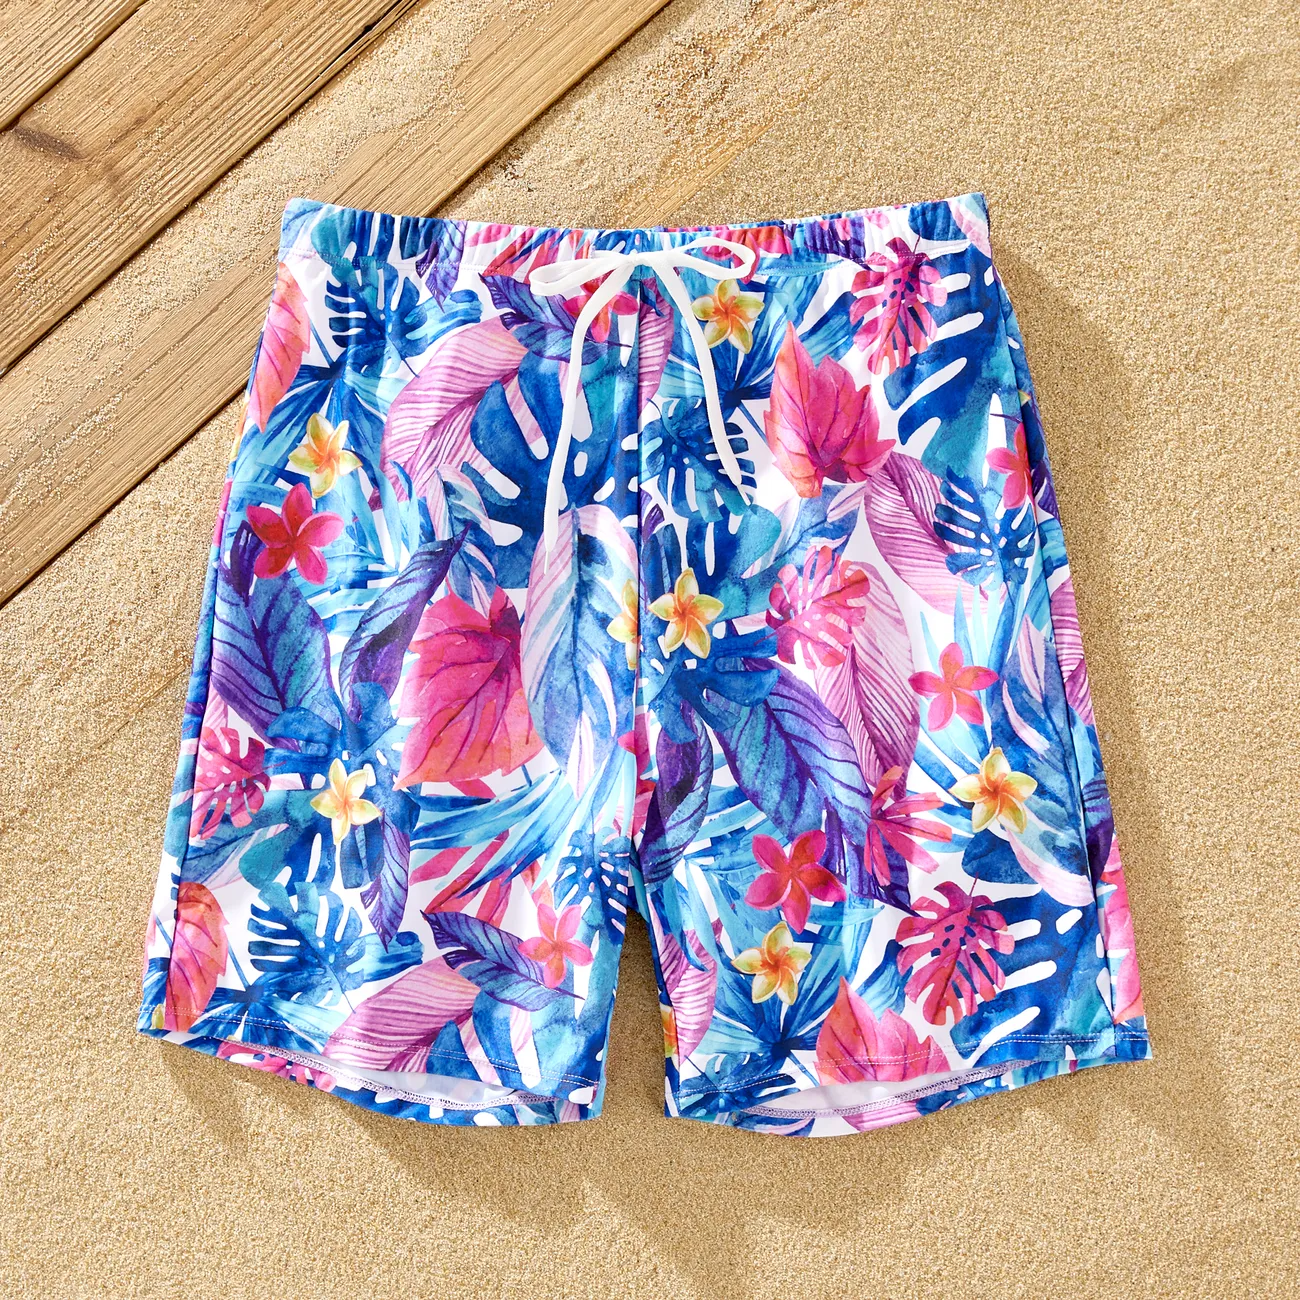 Family Matching Floral Drawstring Swim Trunks or Flutter Sleeves One-Piece Twist Knot Spliced Swimsuit  Purple big image 1